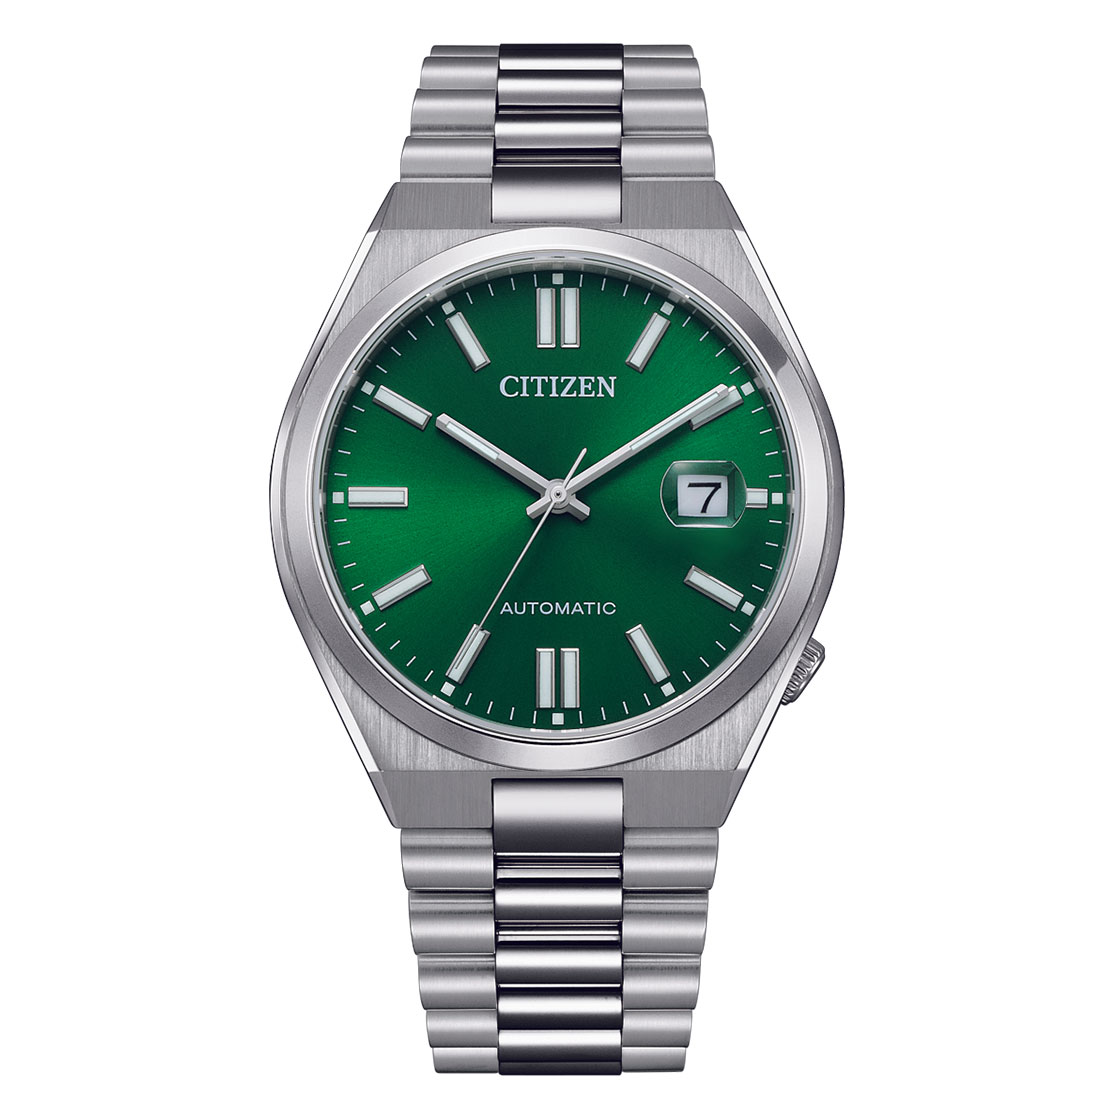 Rolex Day-Date Green Dial Watches - Bob's Watches